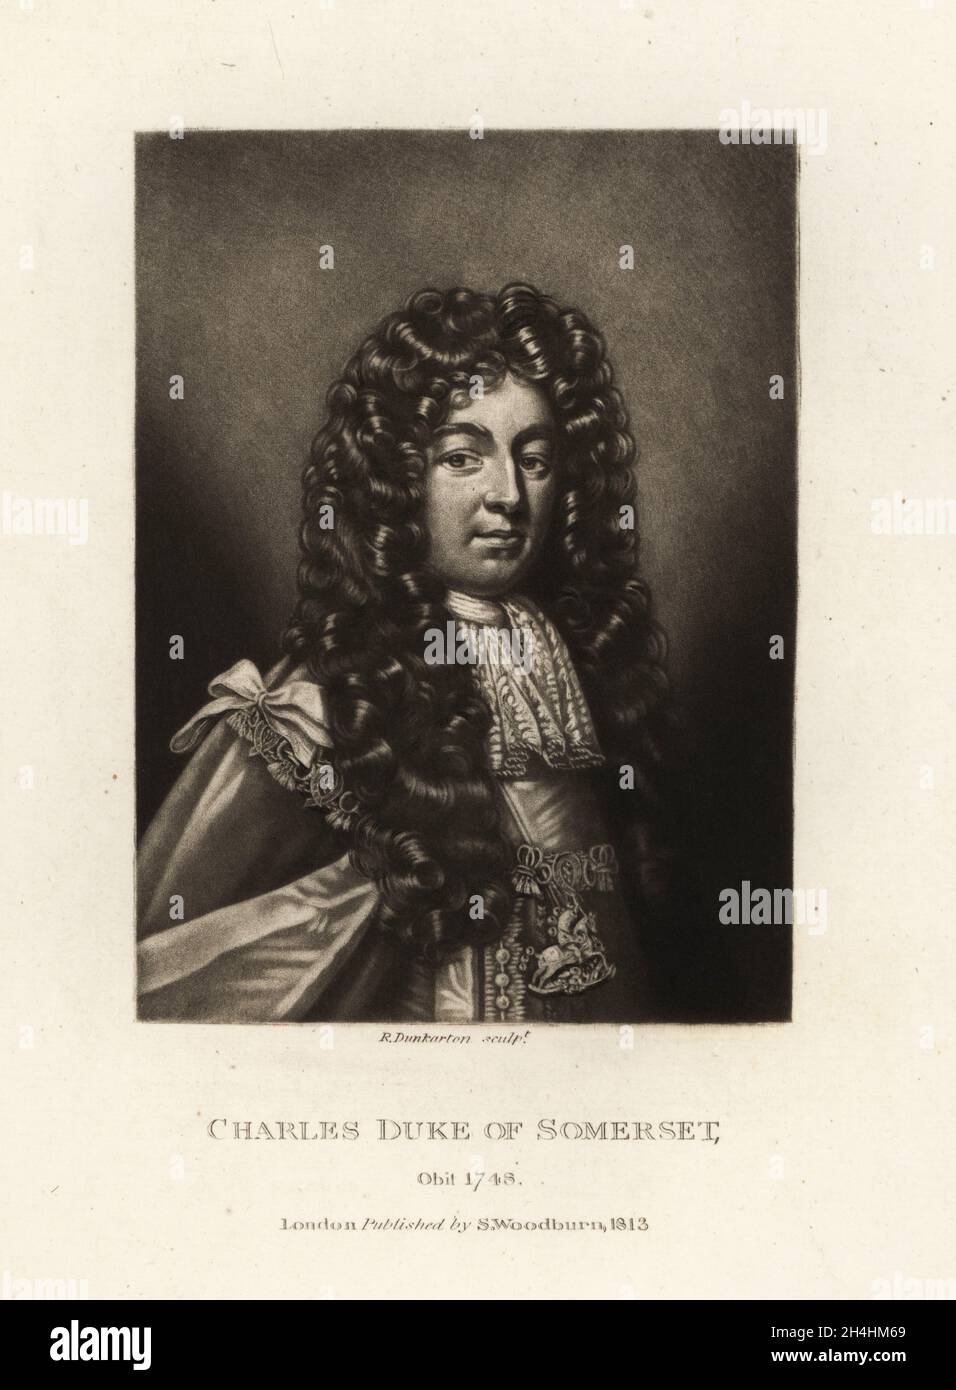 Charles Seymour, 6th Duke of Somerset, 1662-1748. The Proud Duke, British peer, Lord President of the Council and Master of the Horse. Mezzotint engraving by Robert Dunkarton after a portrait by  from Richard Earlom and Charles Turner's Portraits of Characters Illustrious in British History Engraved in Mezzotinto, published by S. Woodburn, London, 1813. Stock Photo